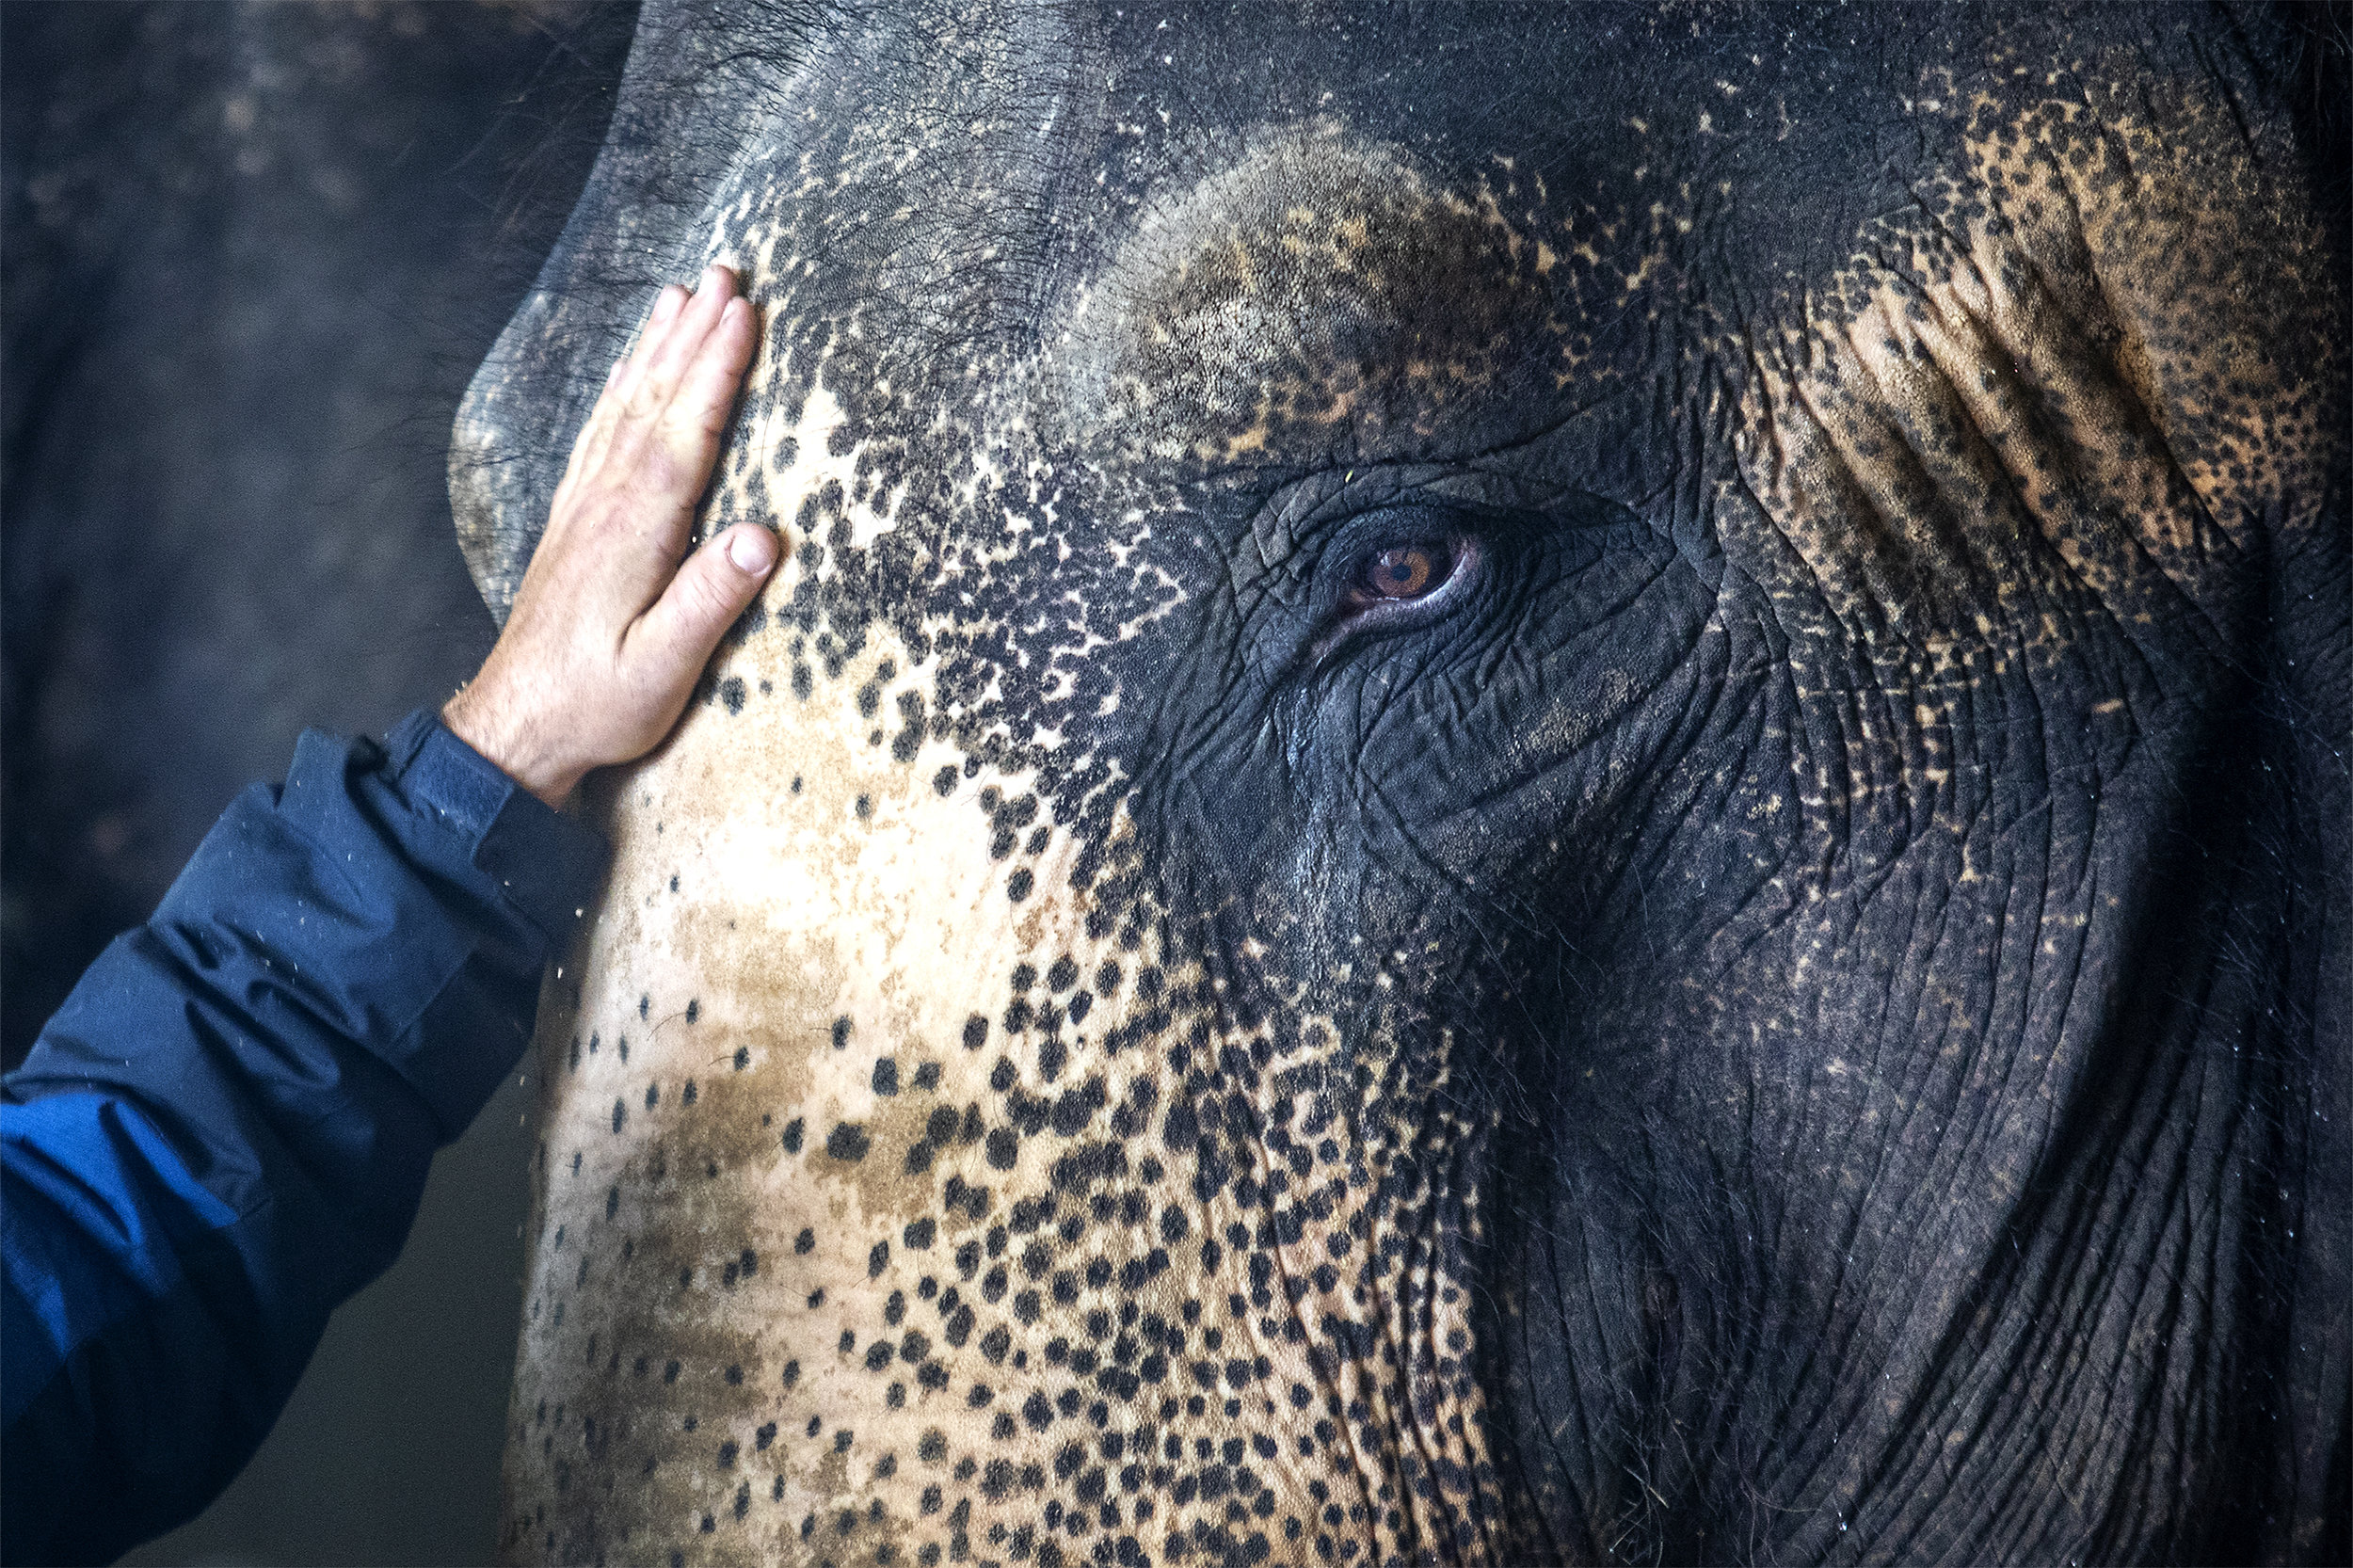  Rex Williams places his hand on his elephant Bonnie's head as they prep for the Powder River Shrine Circus on Wednesday, May 1, 2019. Bonnie is a 45 year old asian elephant. 